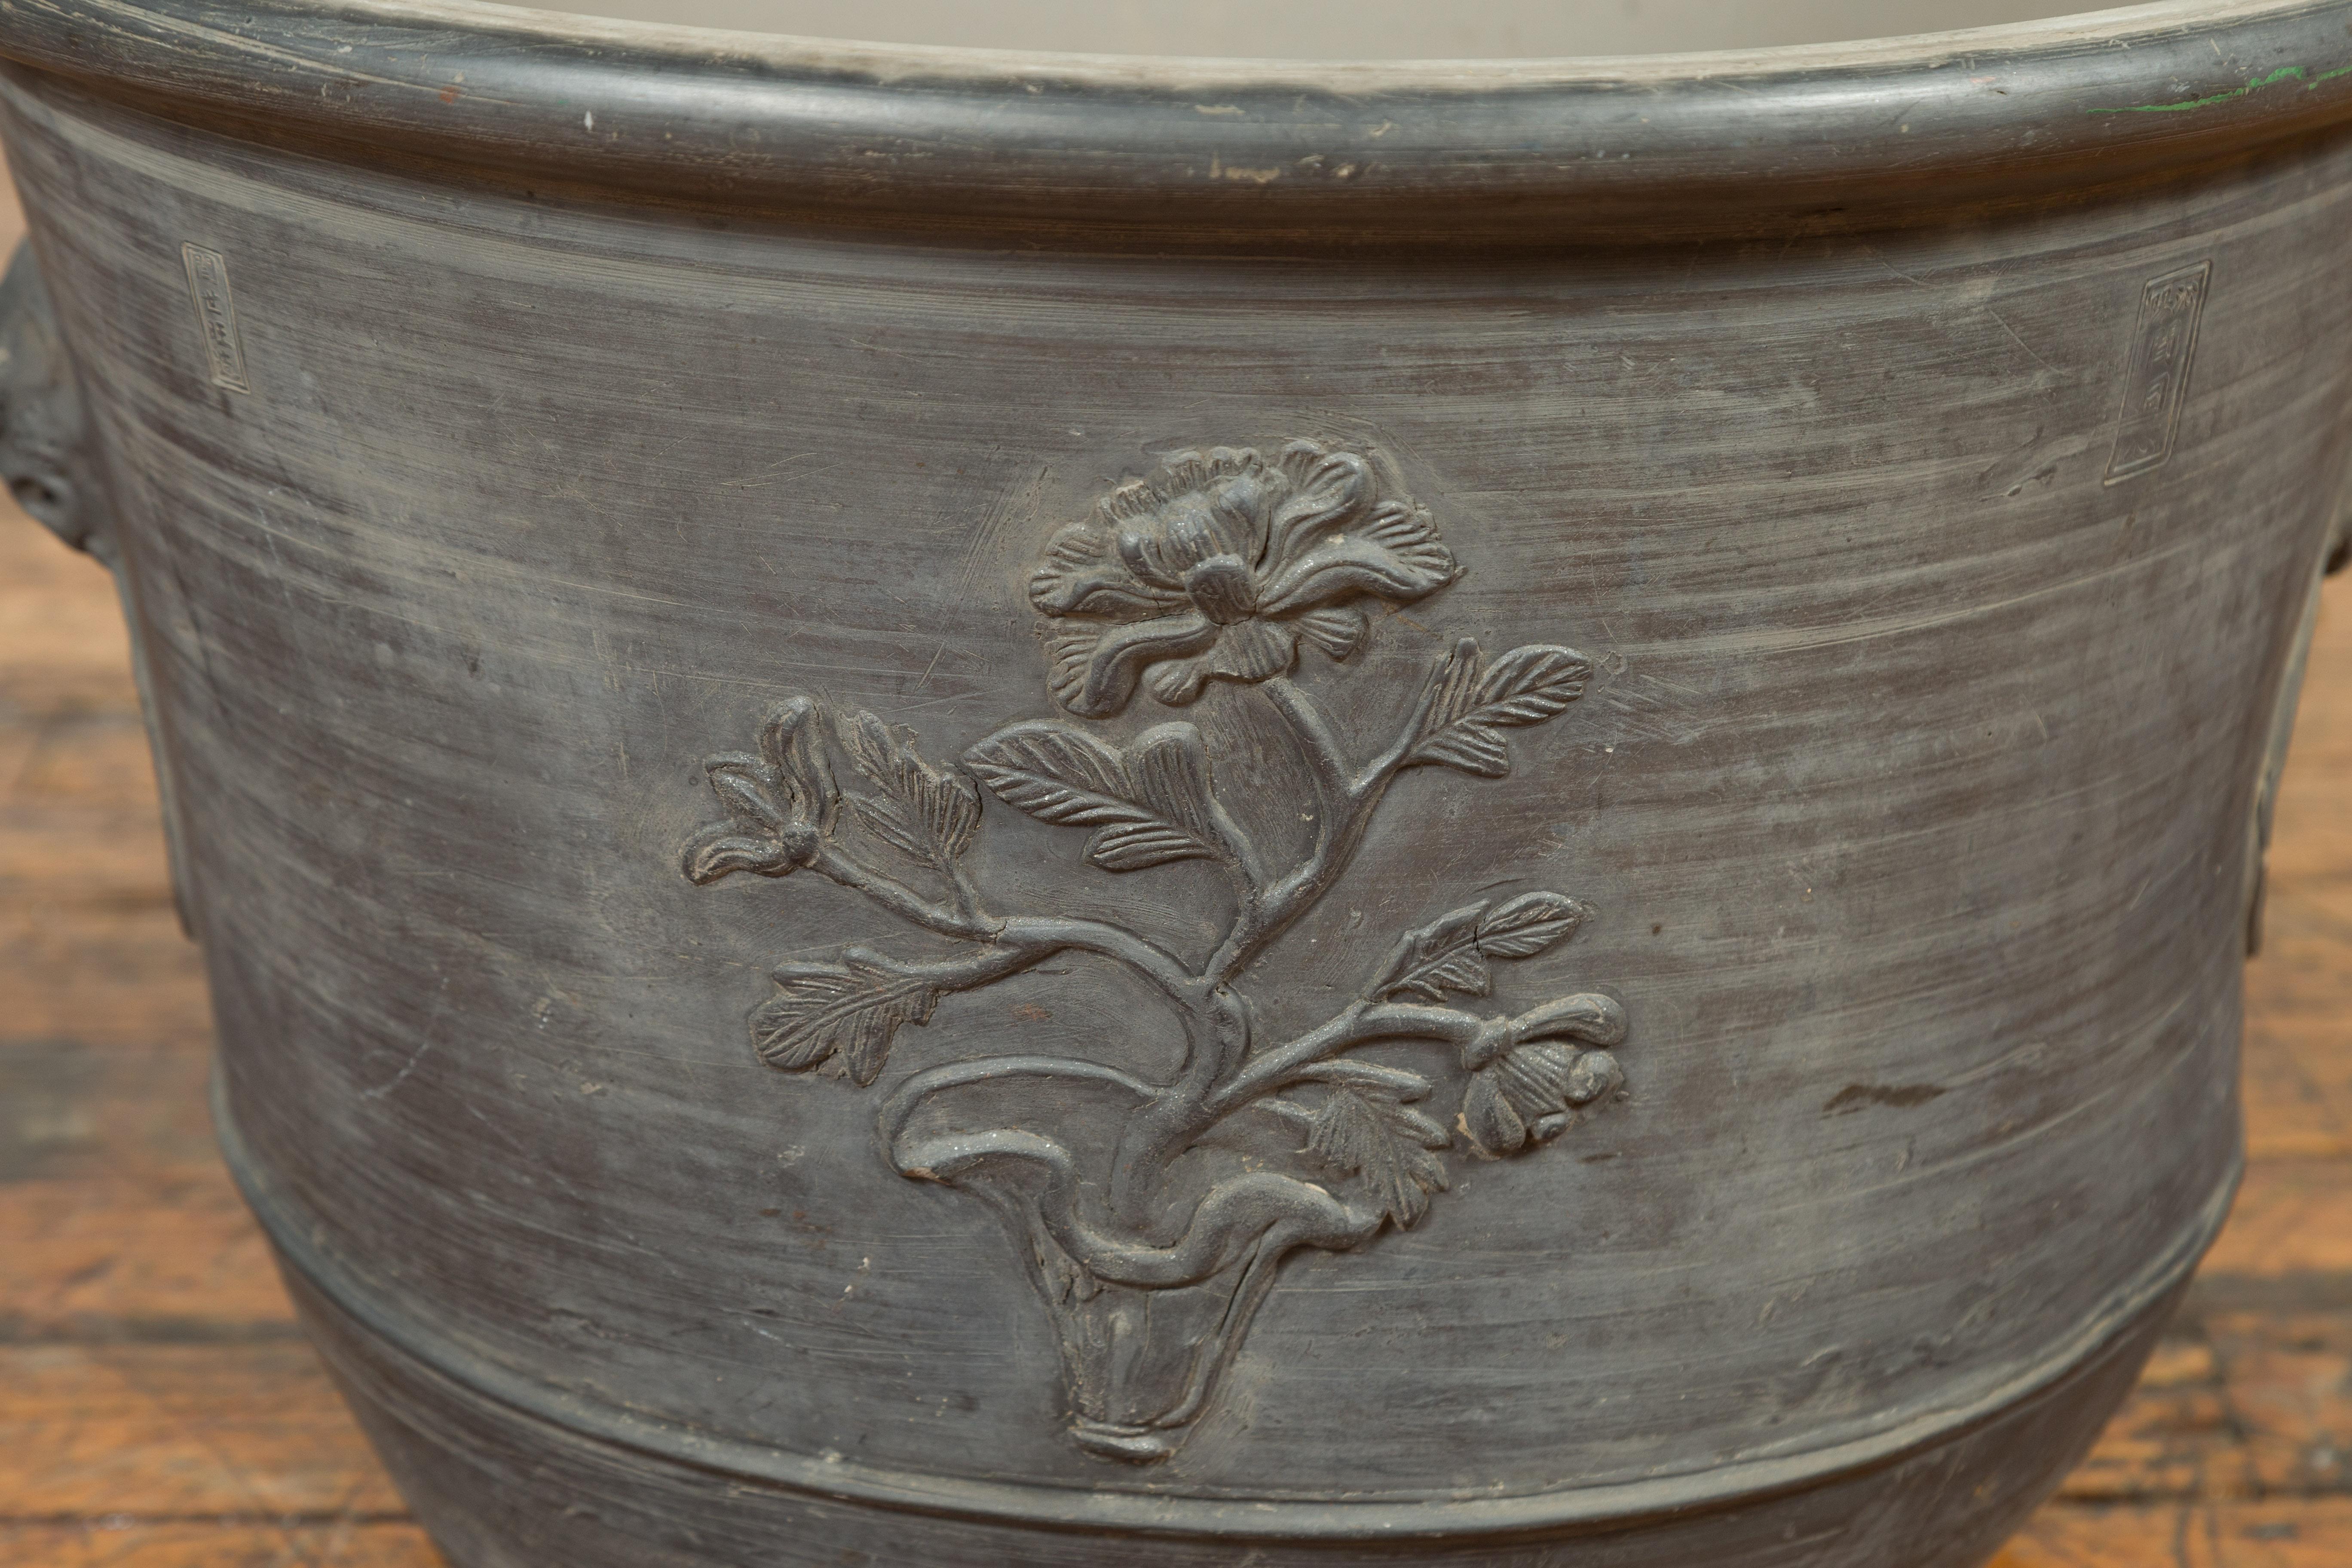 20th Century Large Chinese Ceramic Planter with Floral Motifs and Lateral Handles